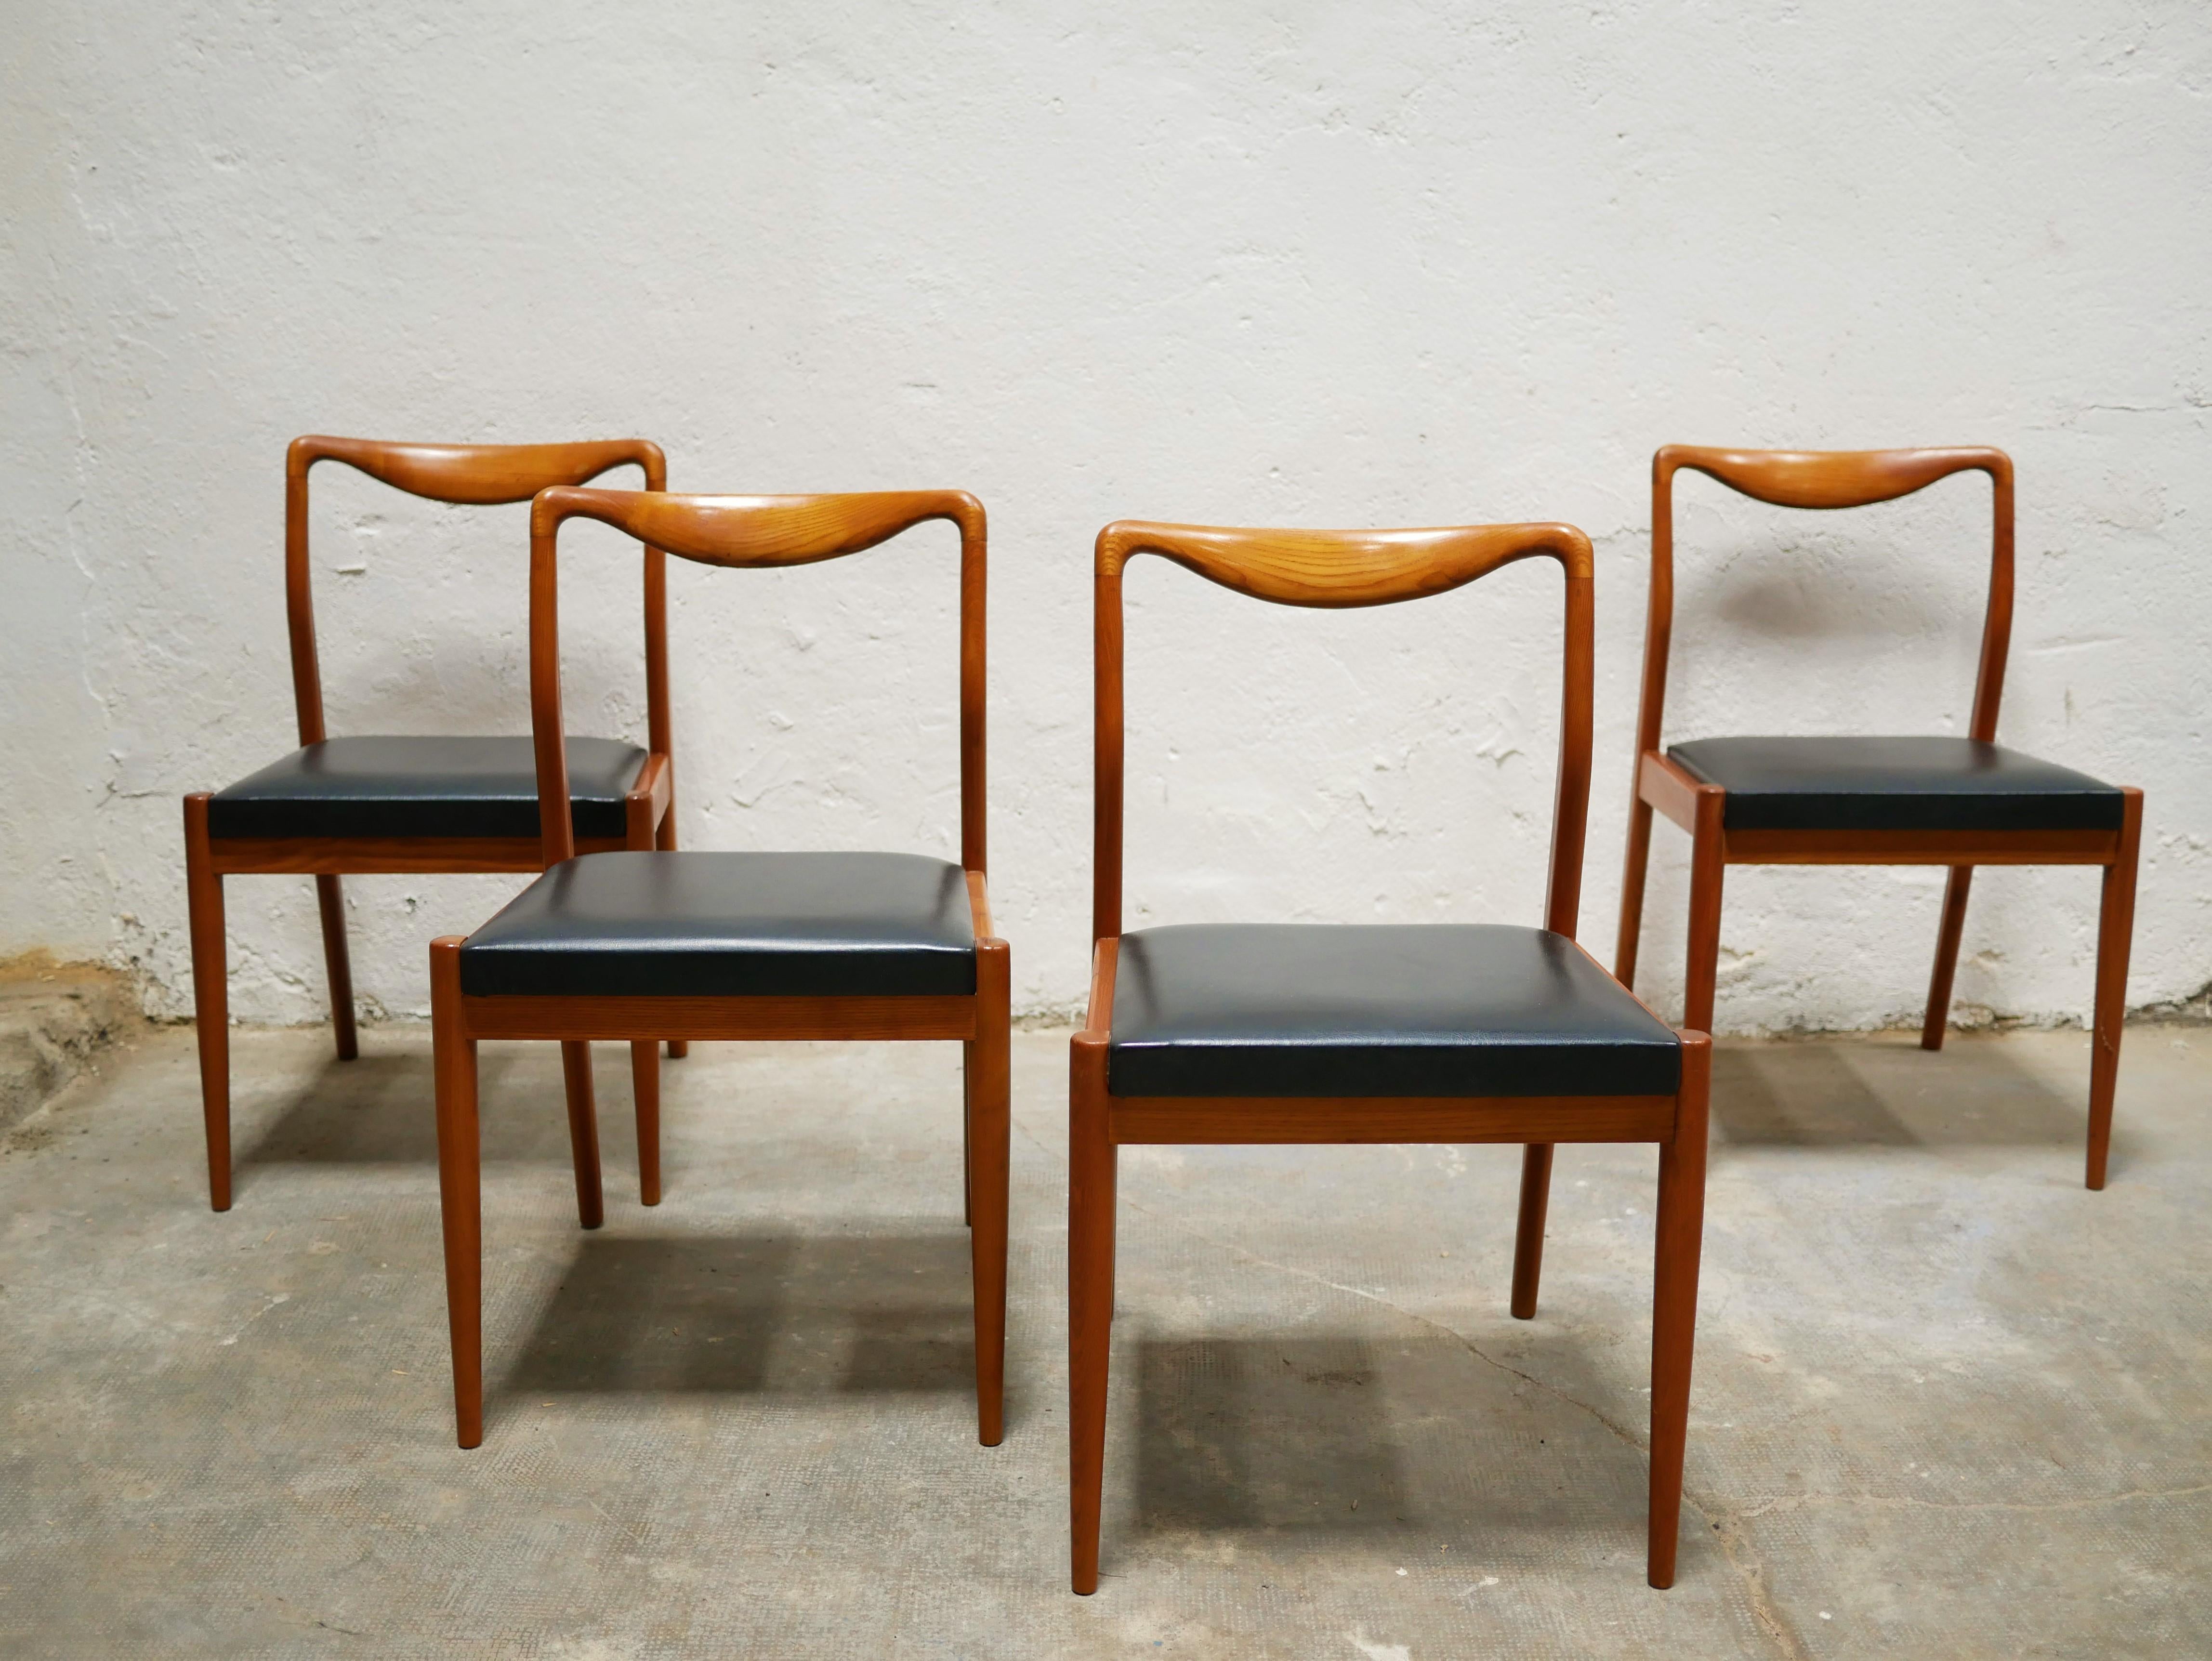 Series of 4 Vintage Scandinavian Chairs in Teak and Leatherette For Sale 1